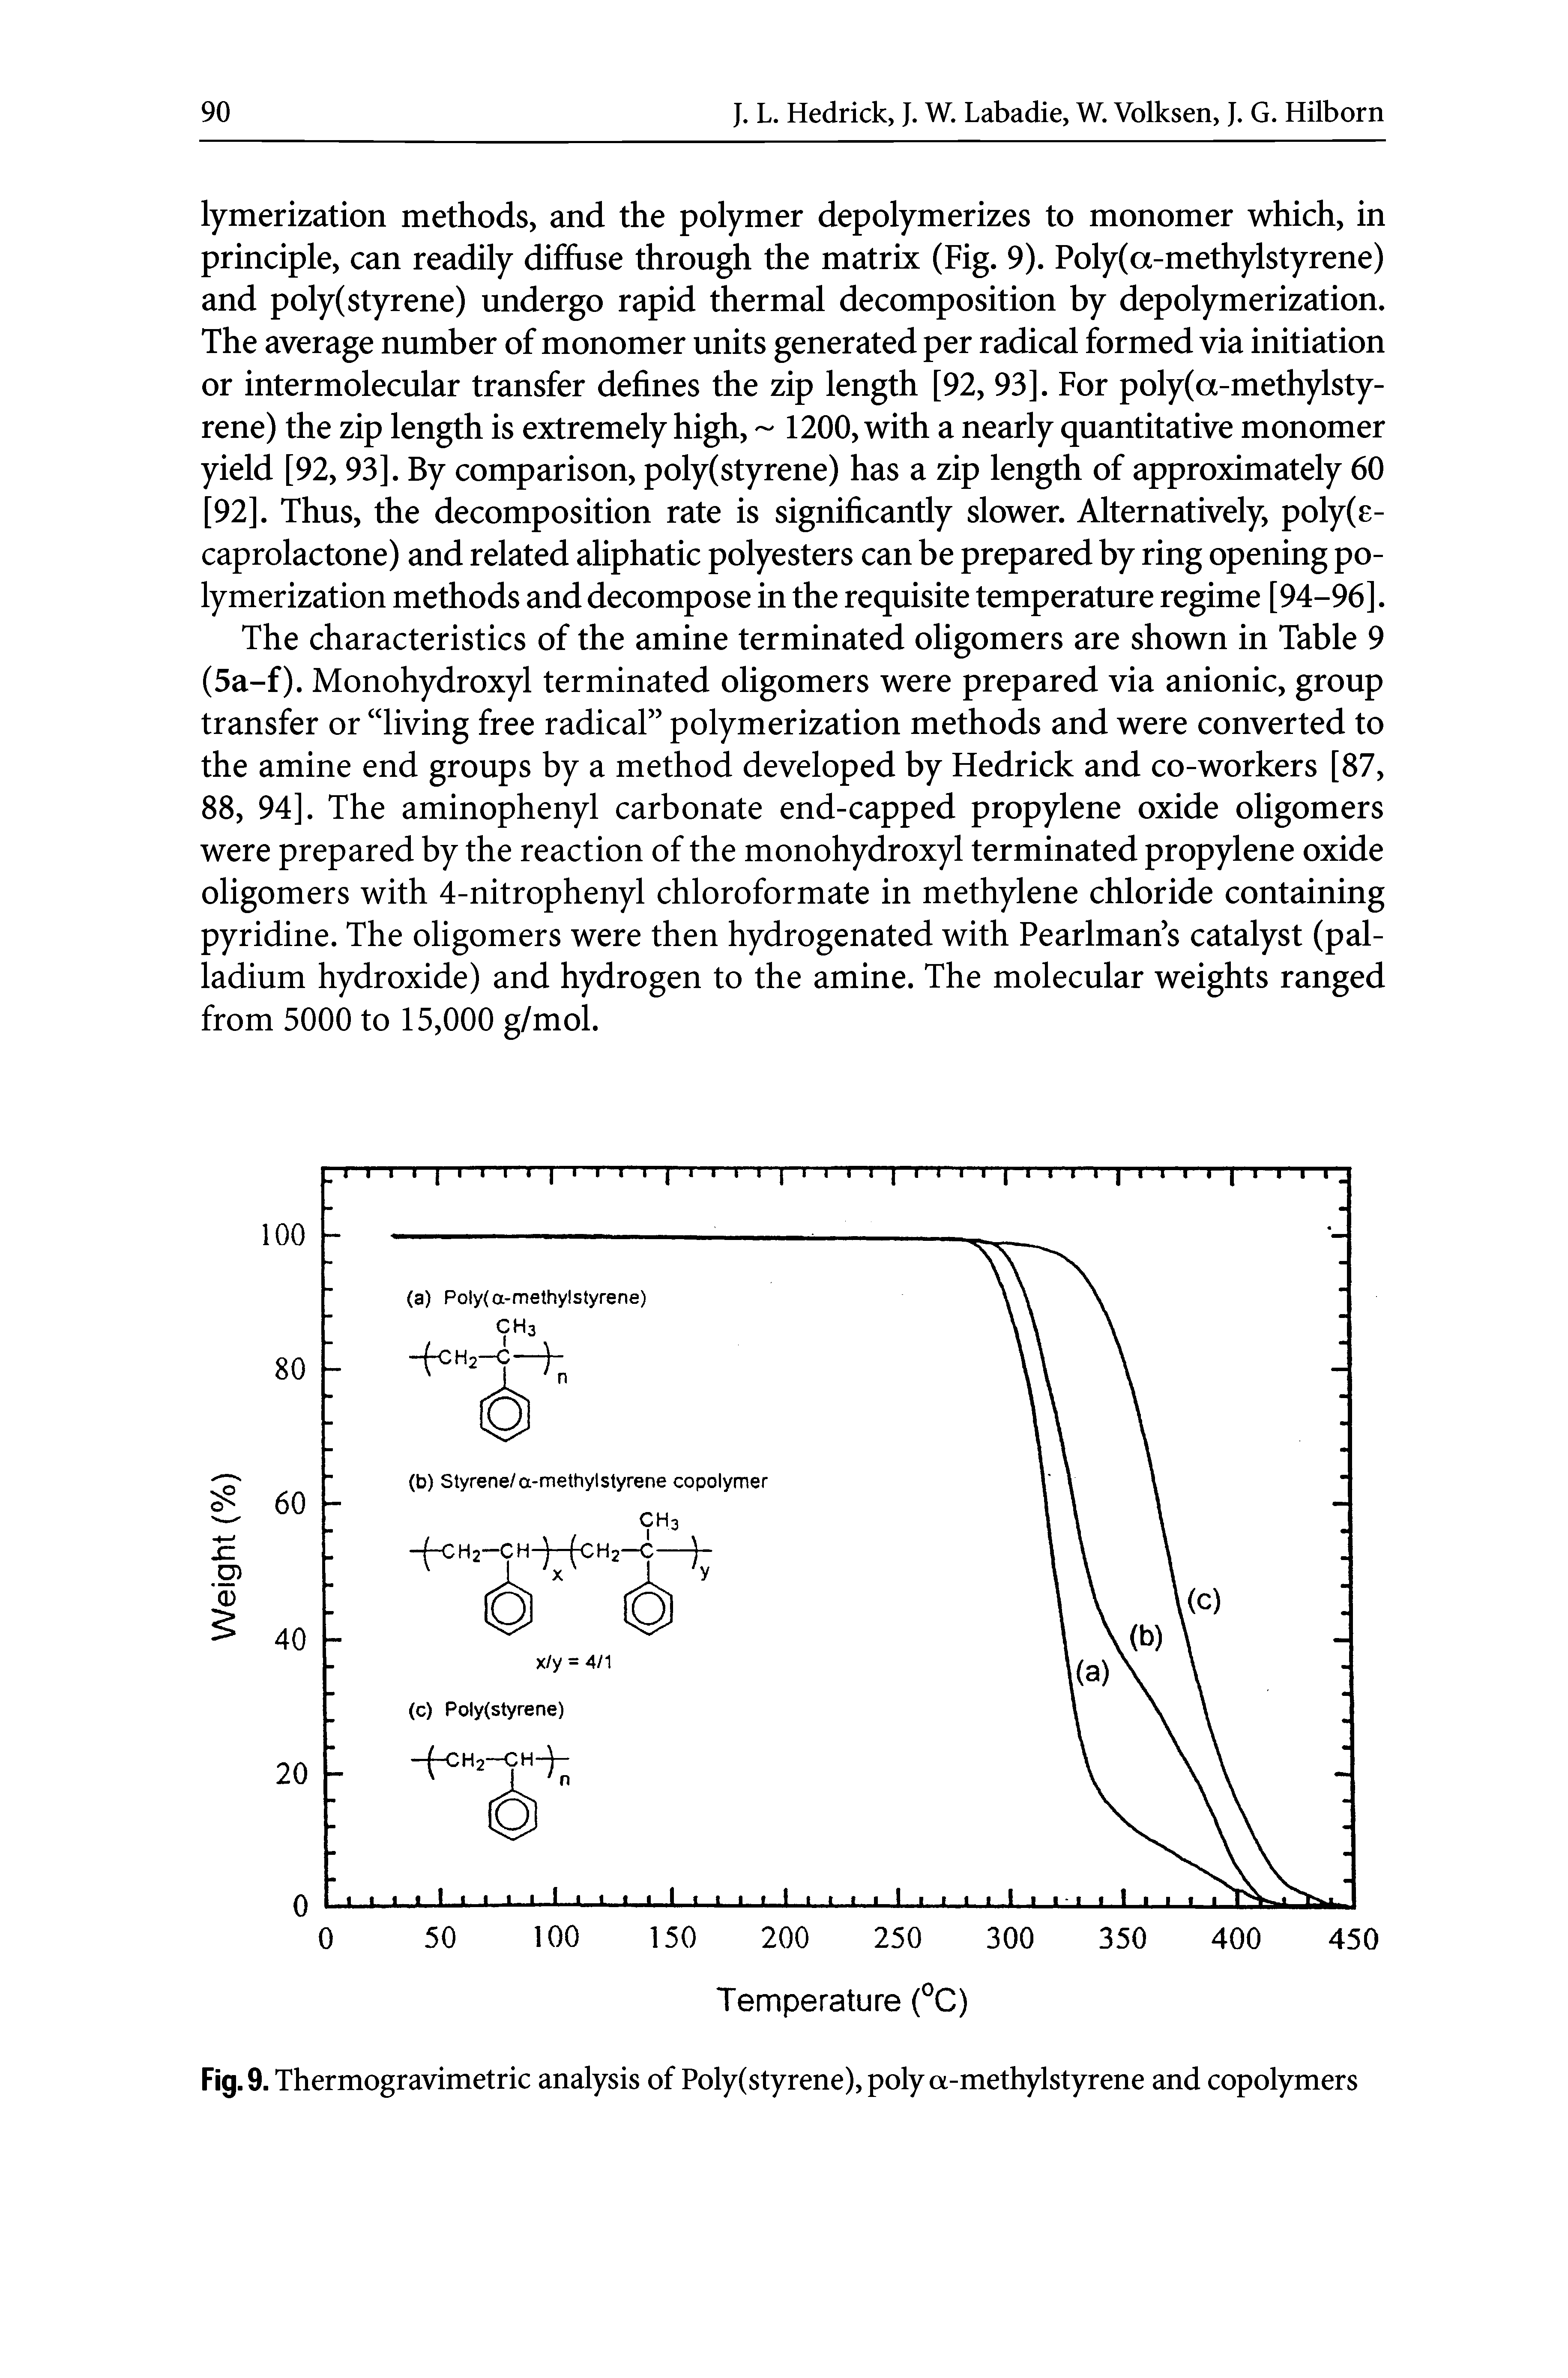 Fig. 9. Thermogravimetric analysis of Poly(styrene), poly a-methylstyrene and copolymers...